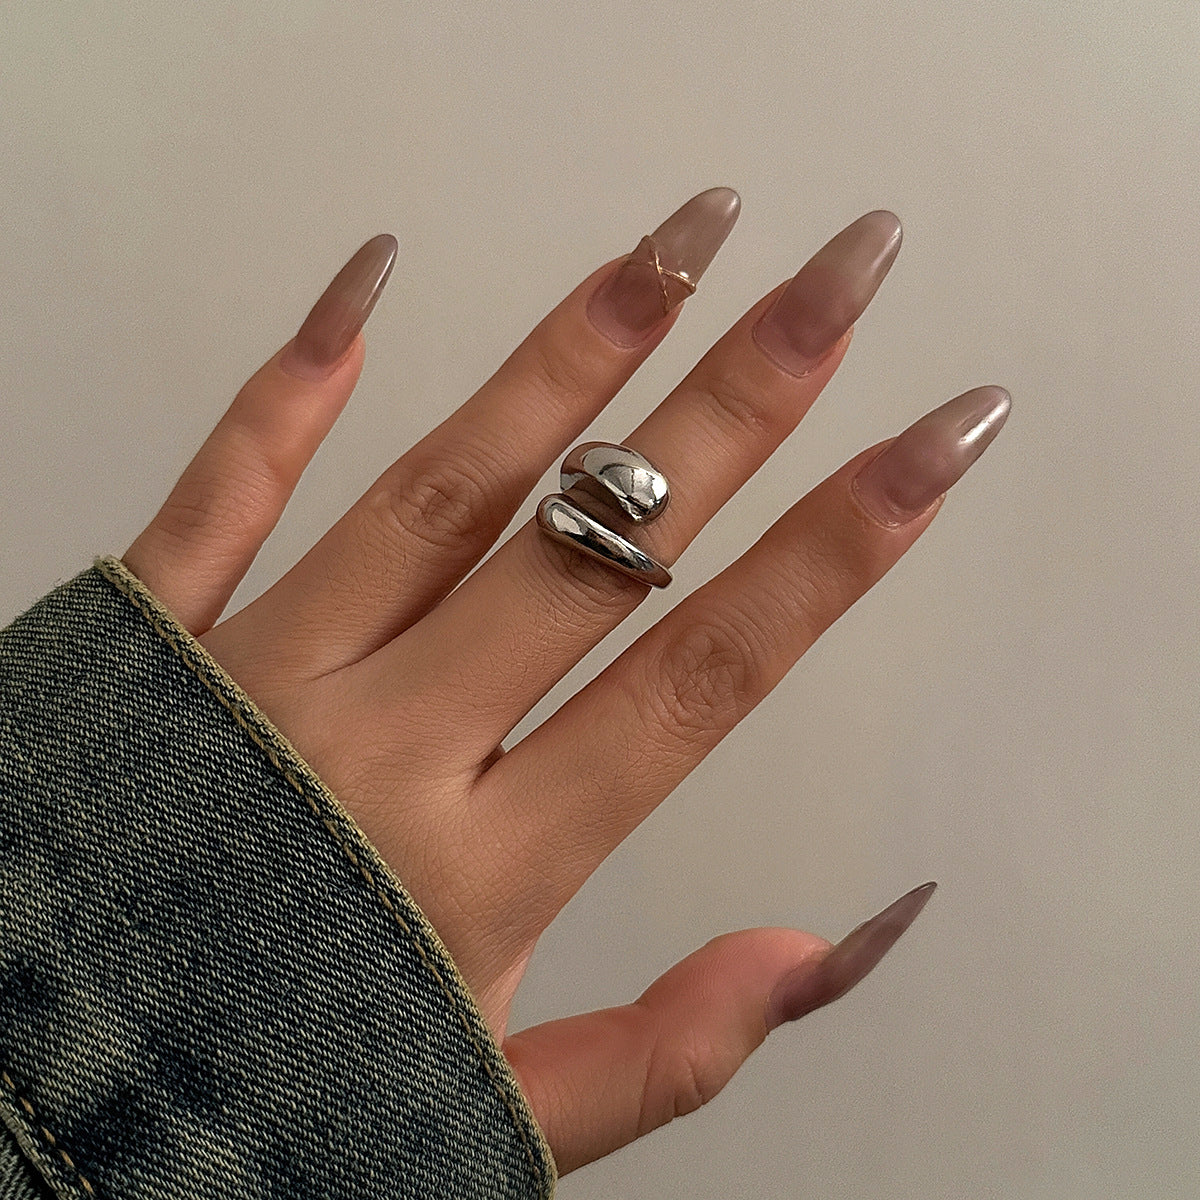 European and American Jewelry Collection: Glamorous Glossy Ball Ring Set with Open Round Design, Unique Geometric Curved Hand Accessory